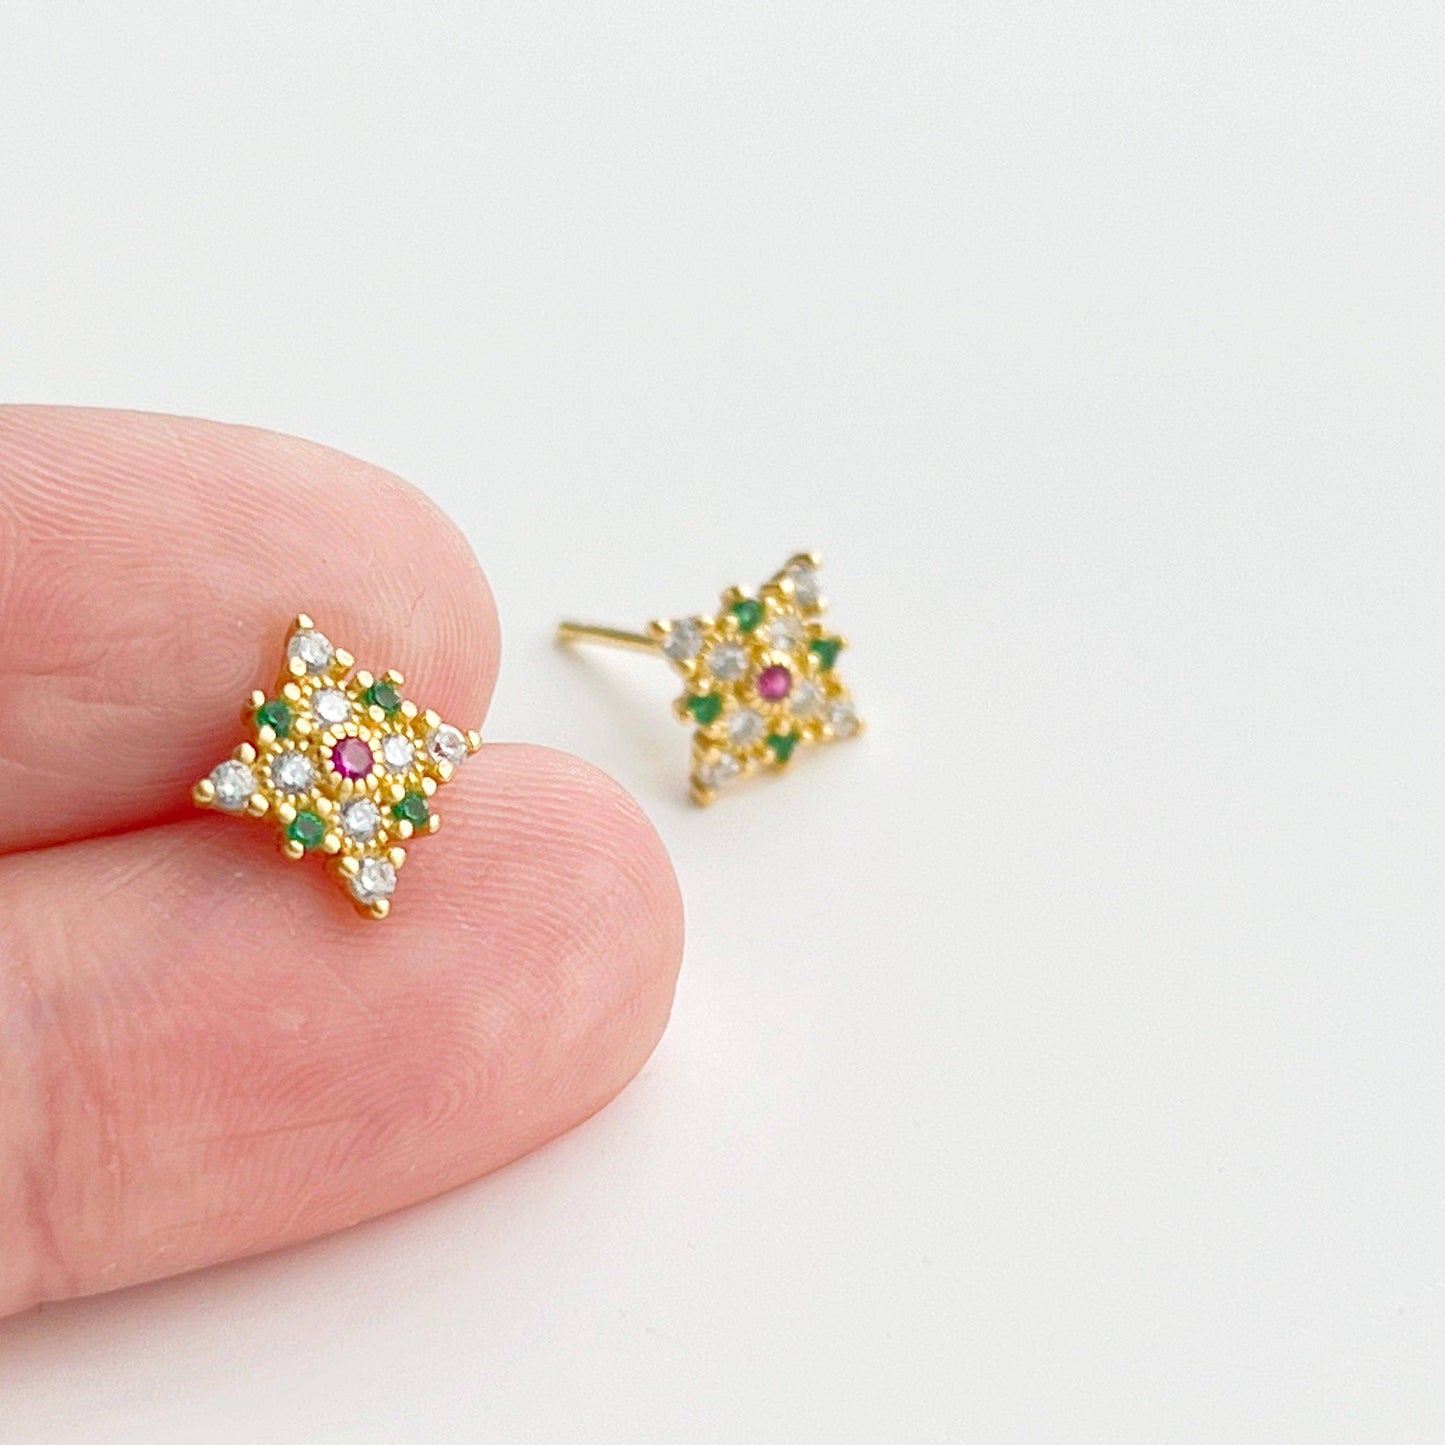 Emerald Stars Earrings - Tiny Size Green and Pink Crystal Sterling Silver Stud Earrings-Ninaouity